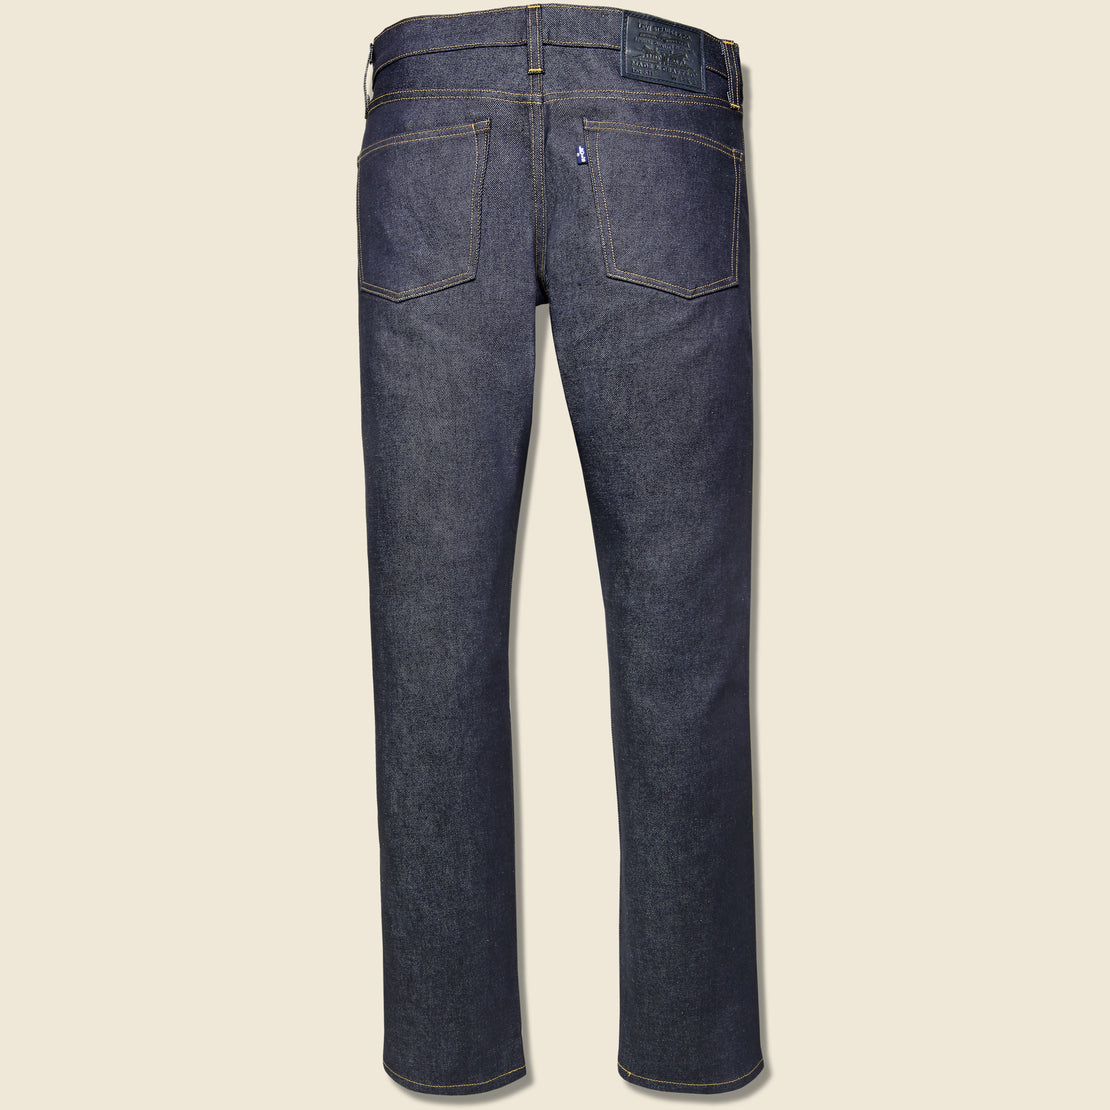 511 Slim Fit Jean - Crisp - Levis Made & Crafted - STAG Provisions - Pants - Denim